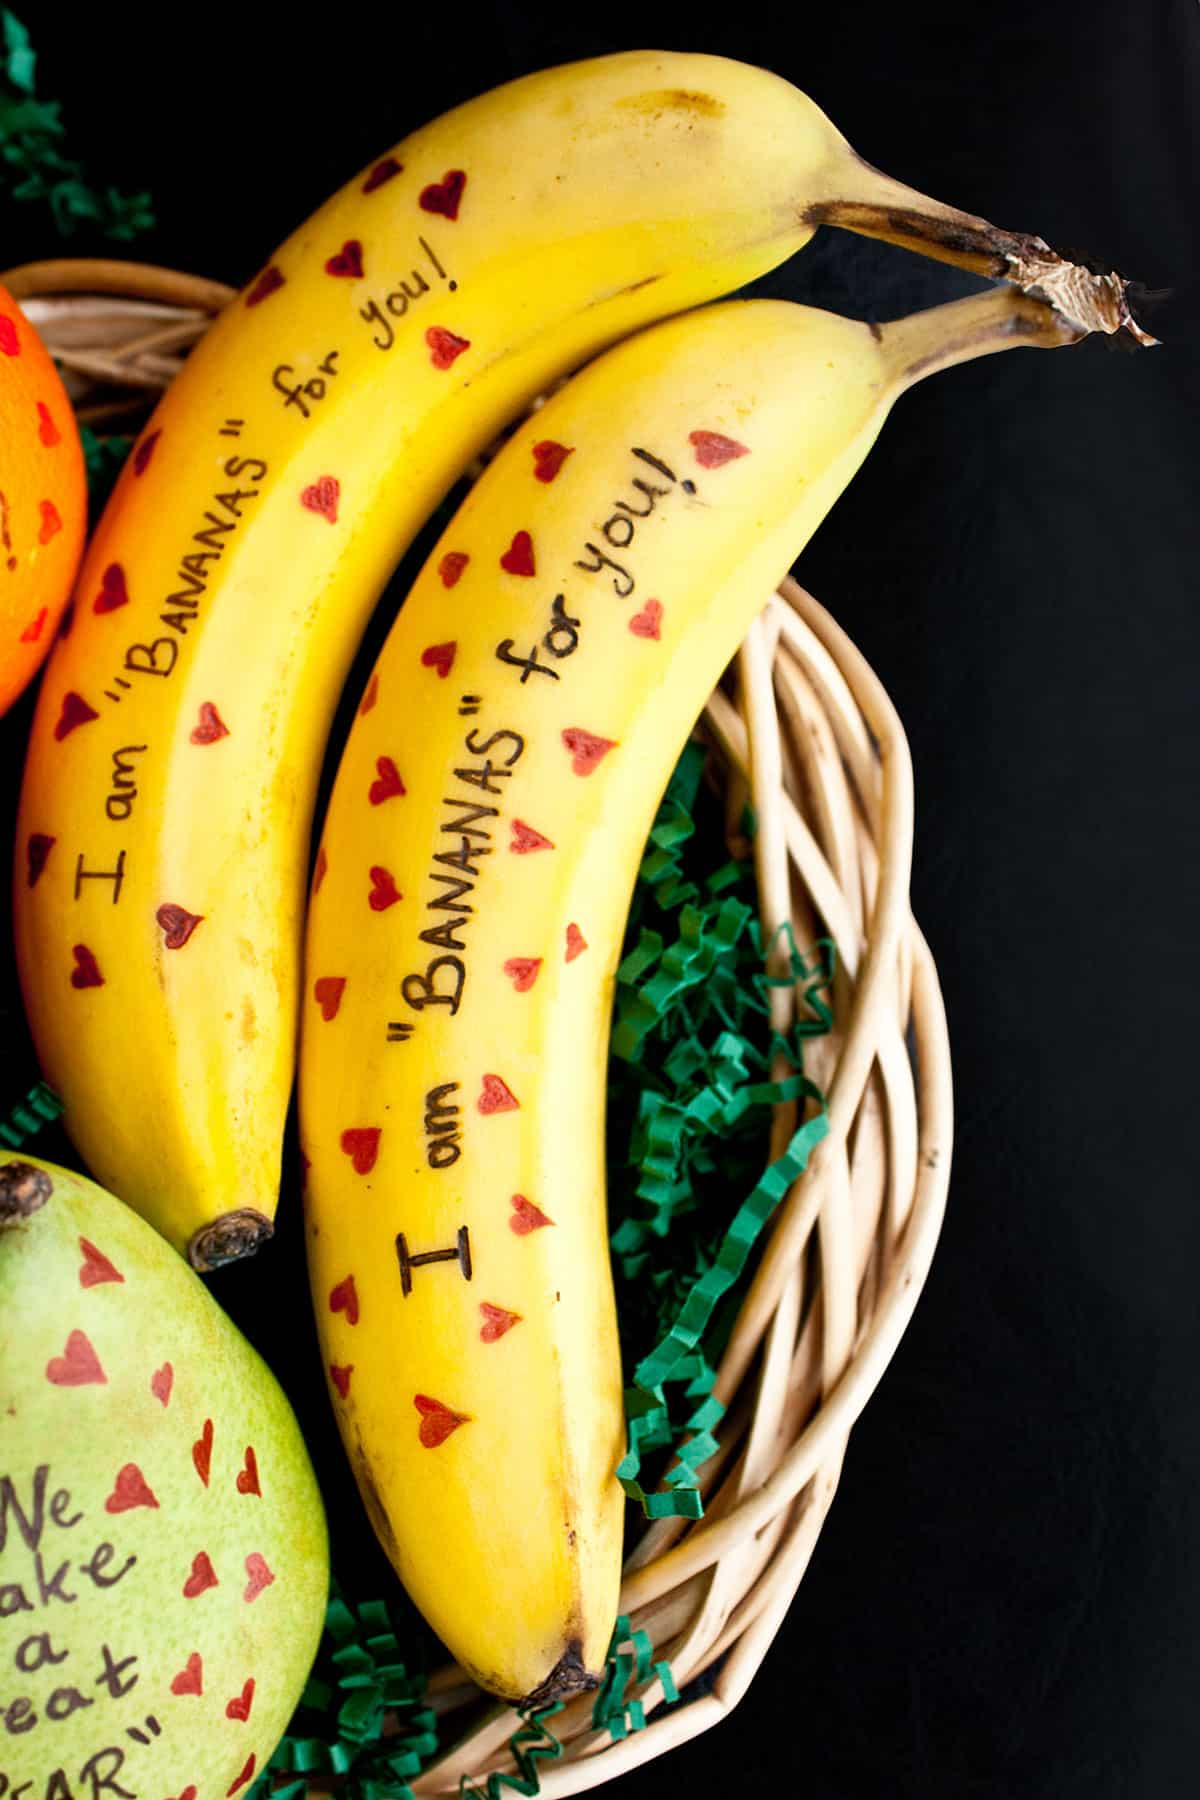 Valentine Bananas With A Cute Note: "I am Bananas For You."